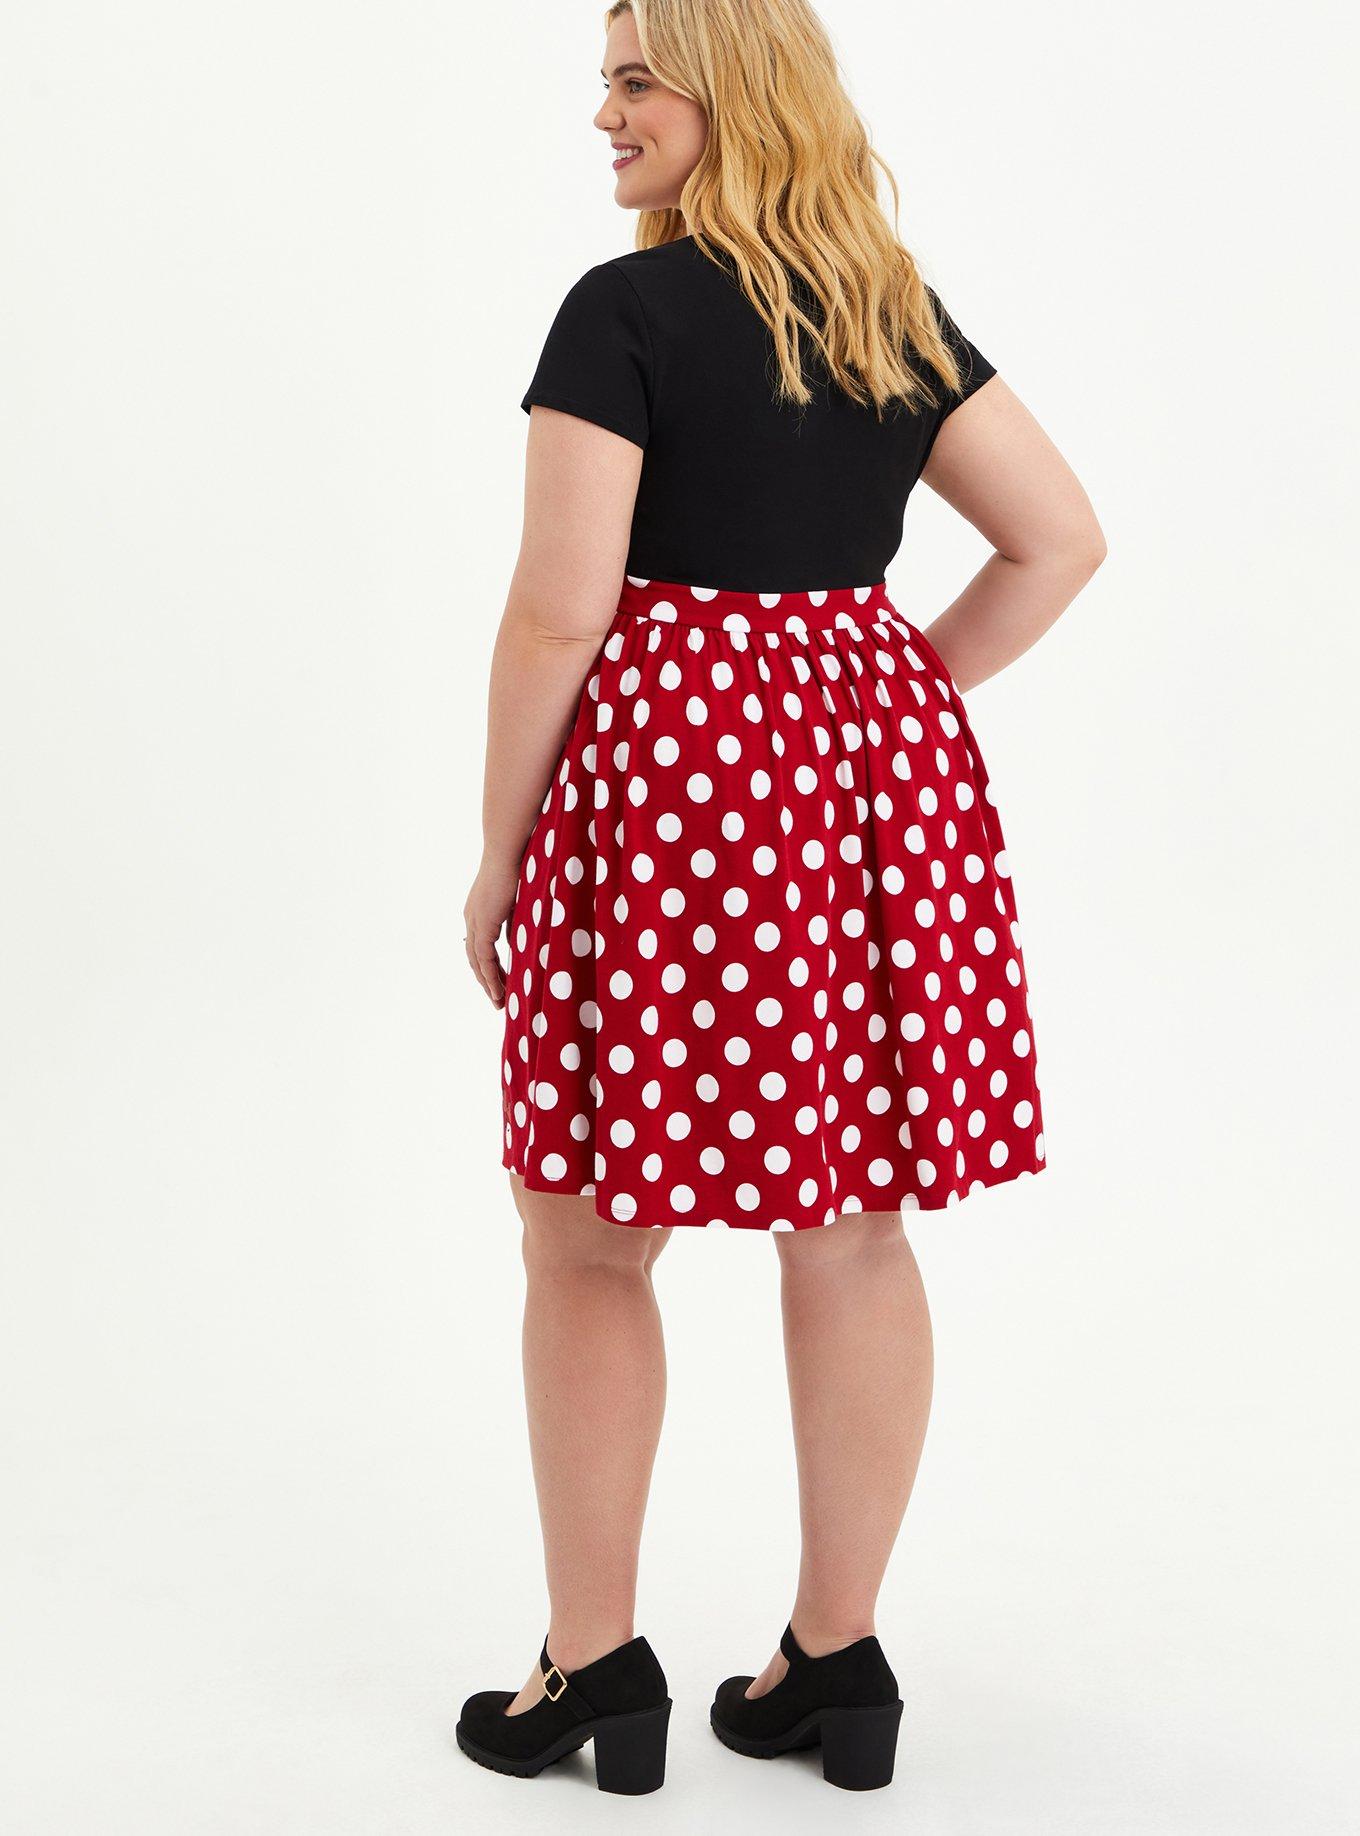 Plus Size Deluxe Minnie Mouse Costume for Women